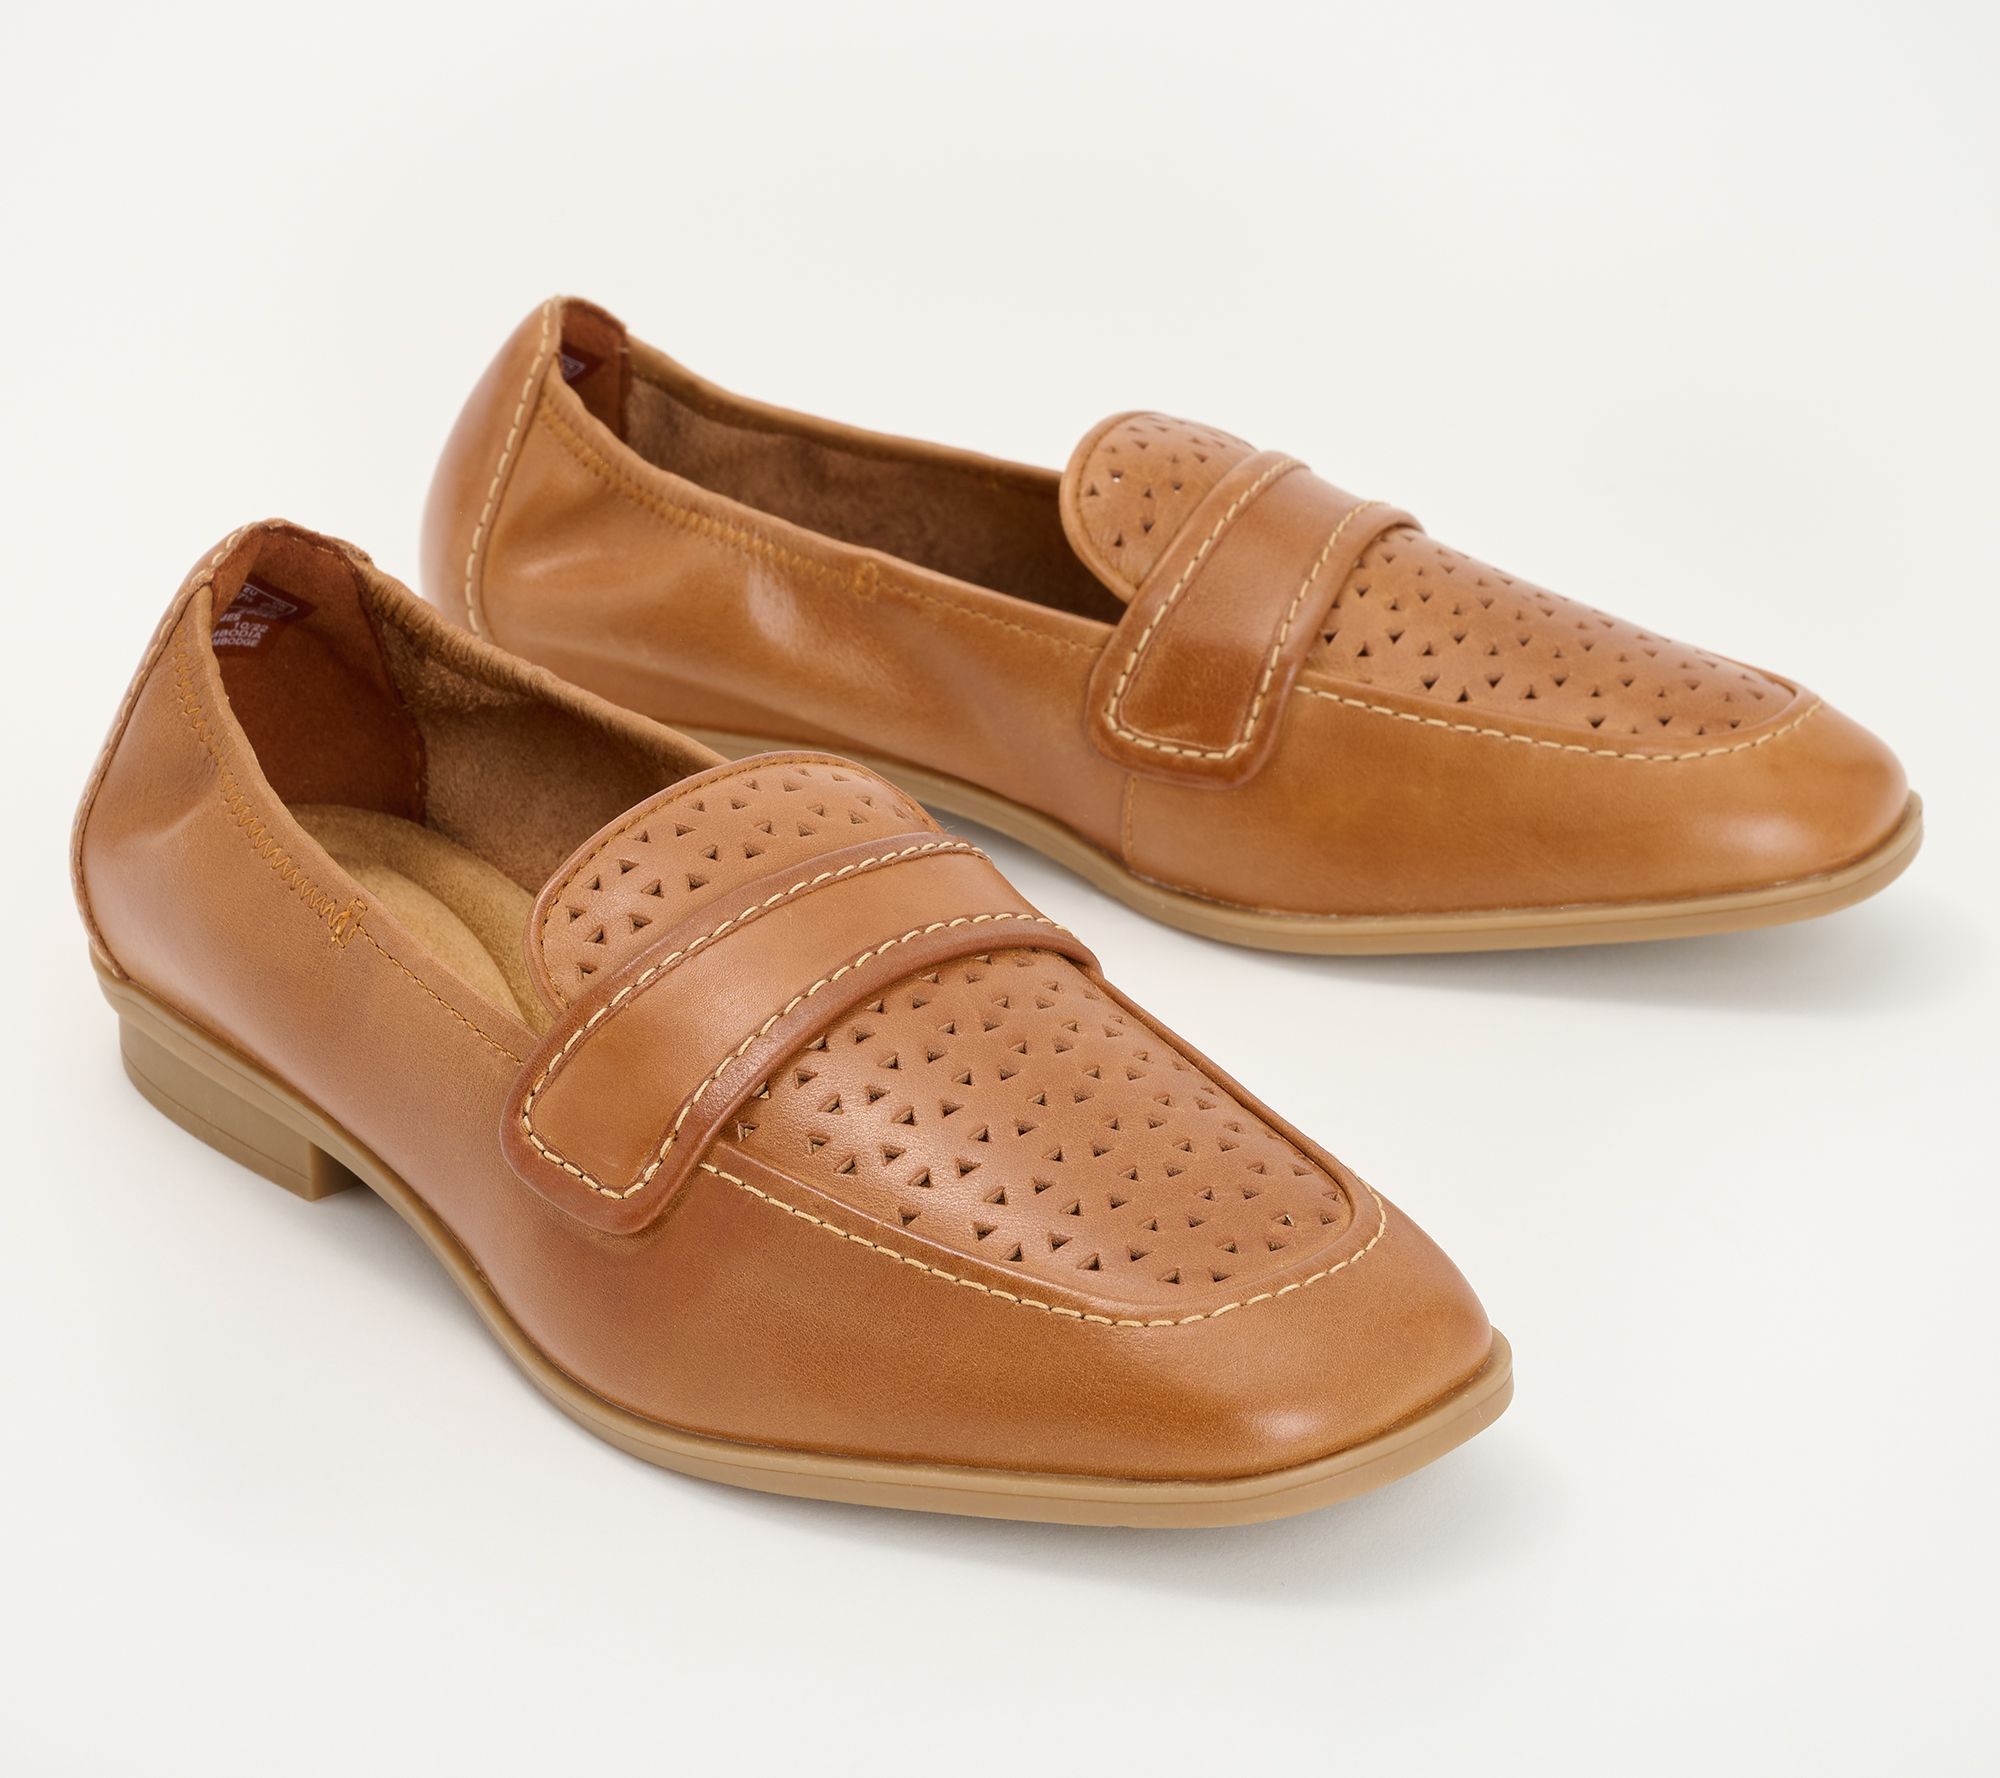 Clarks Perforated Leather Loafers - - QVC.com